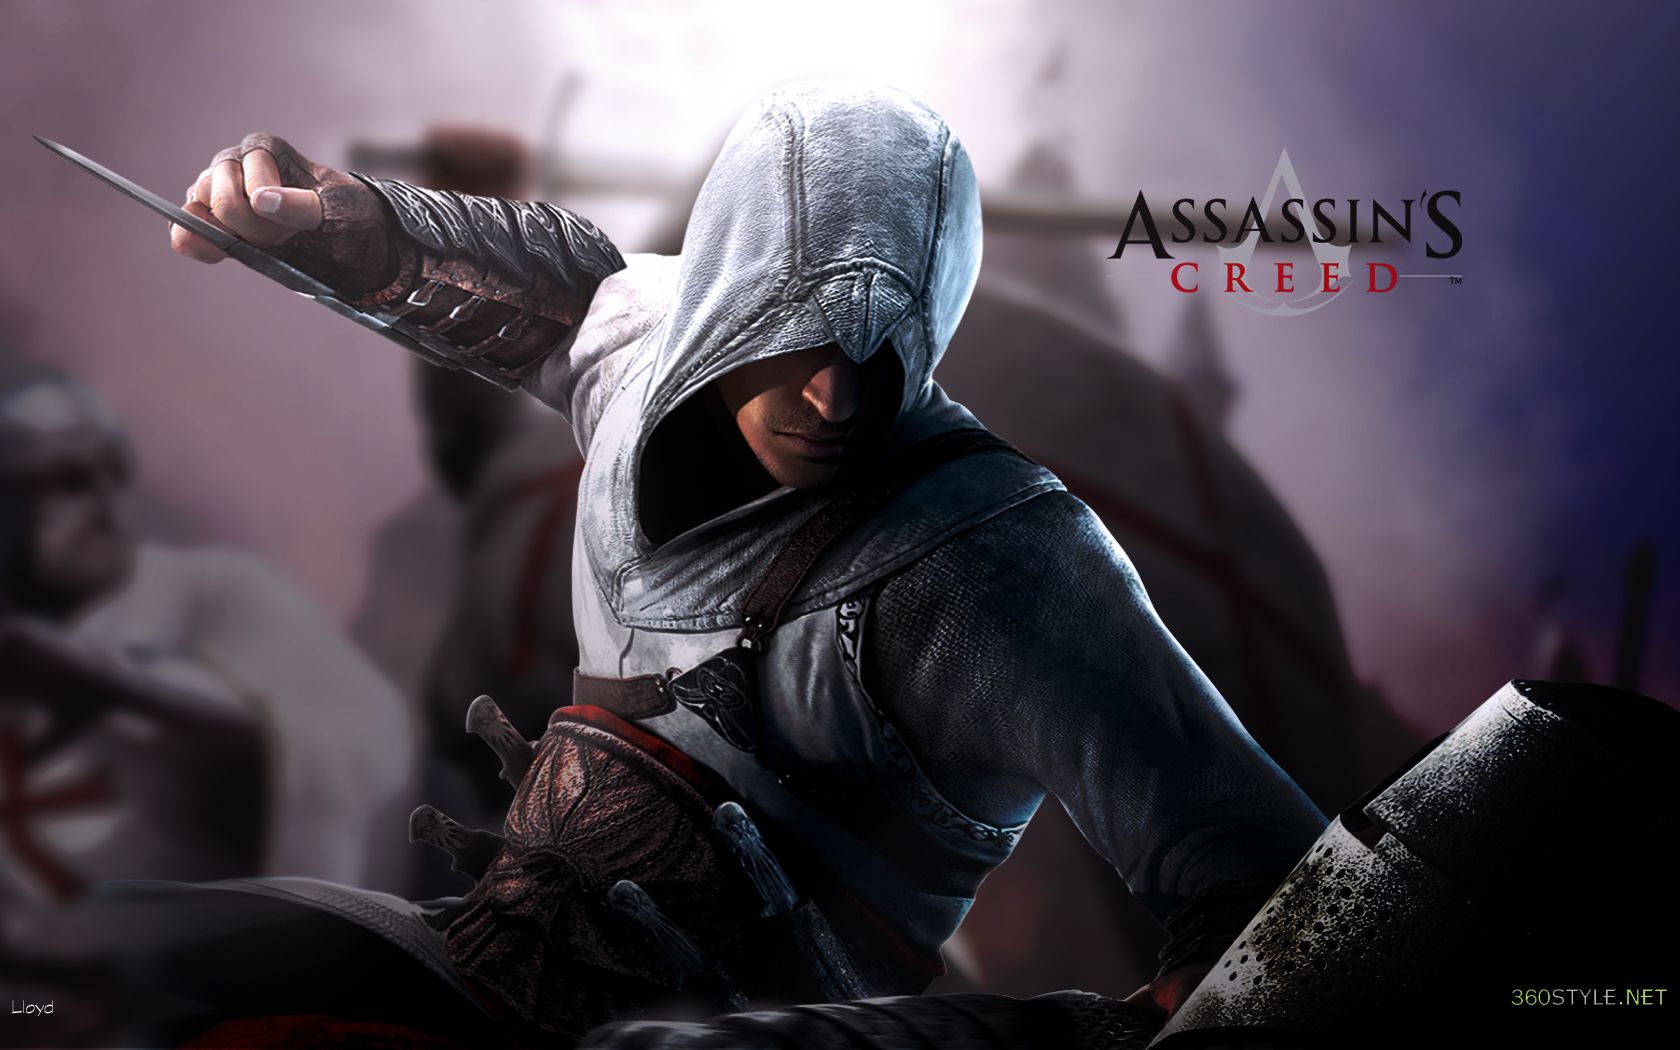 Assassin's Creed Wallpaper by igotgame1075 on DeviantArt